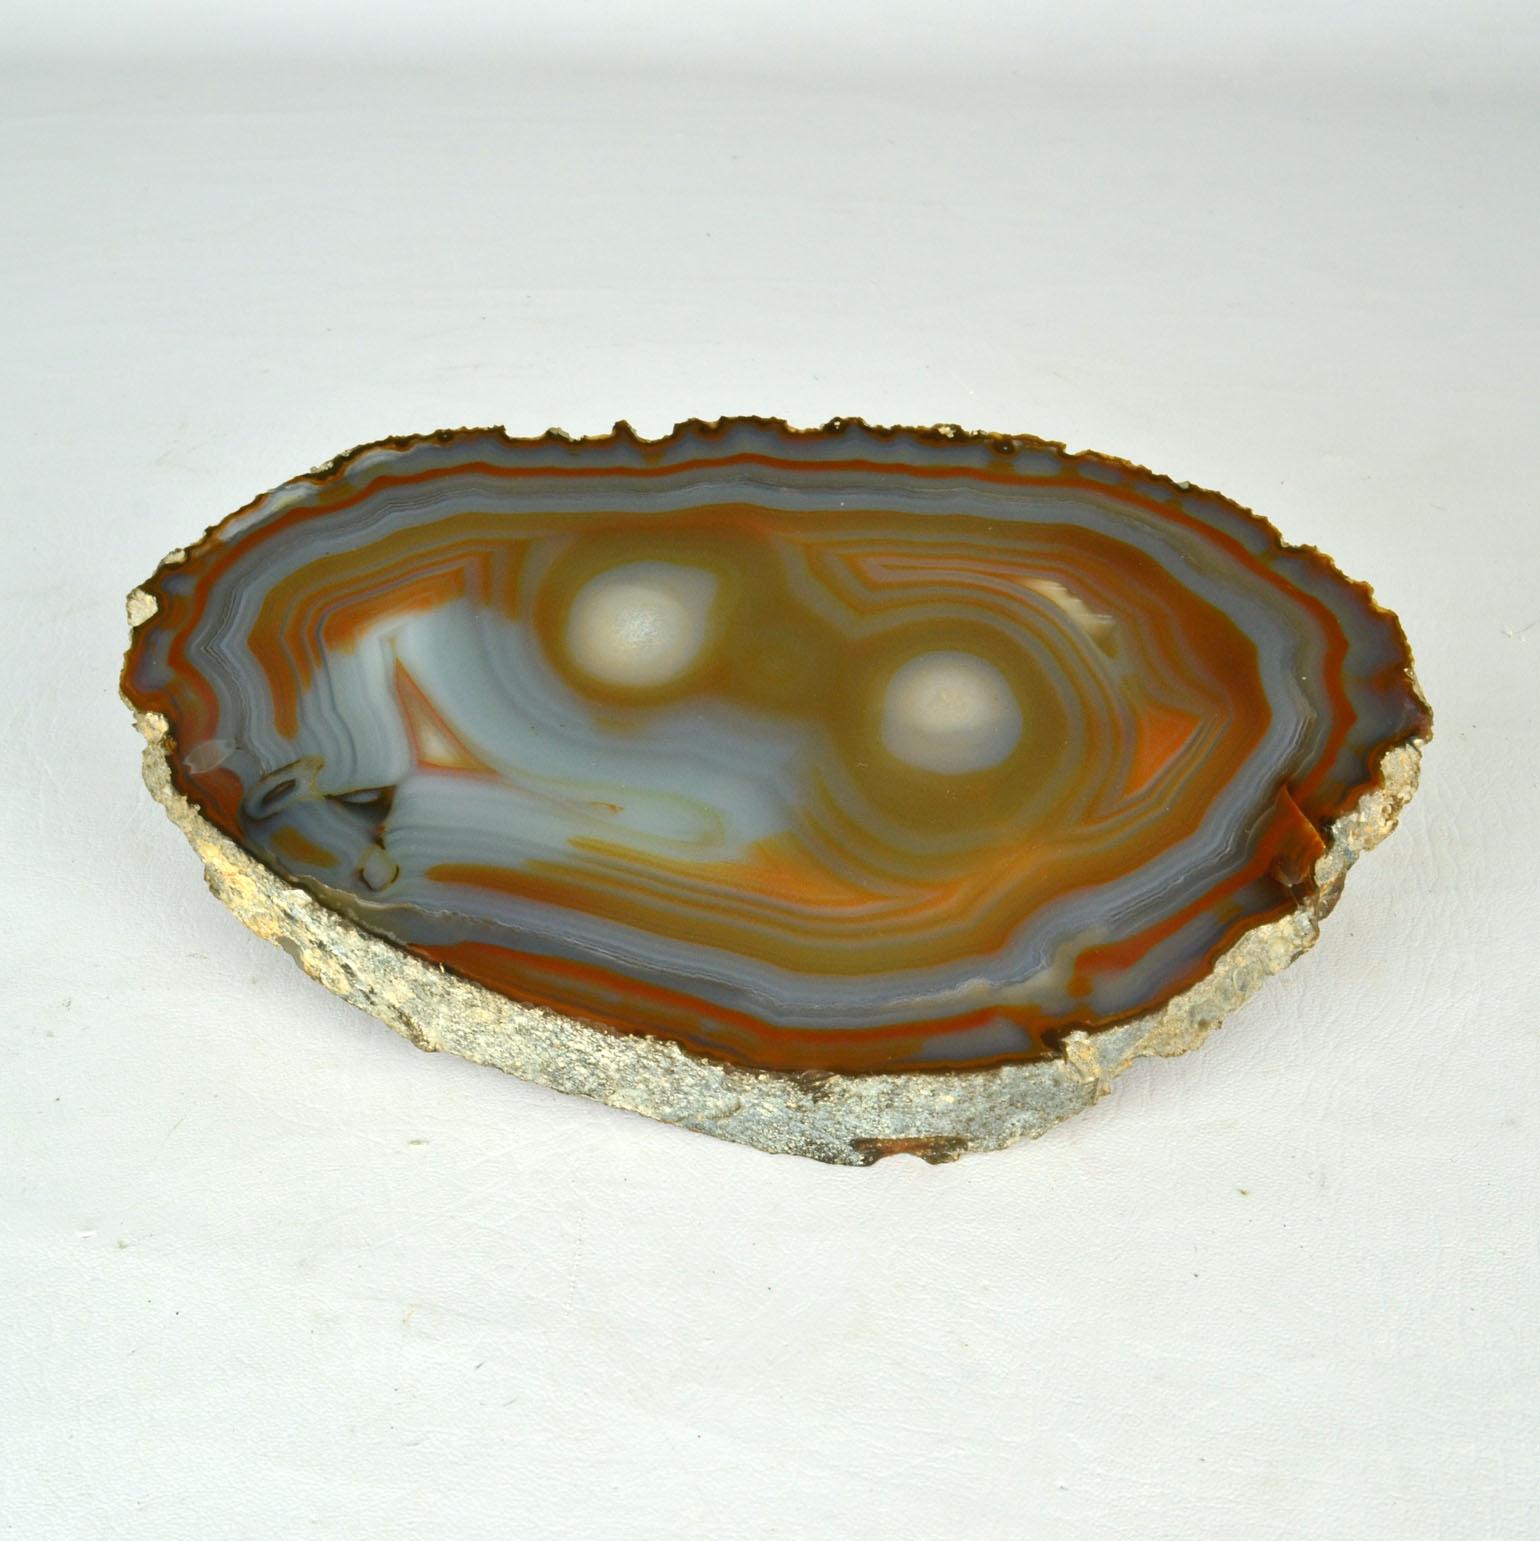 Architectural Push Pull Door Handle in Agate Stone In Excellent Condition For Sale In London, GB